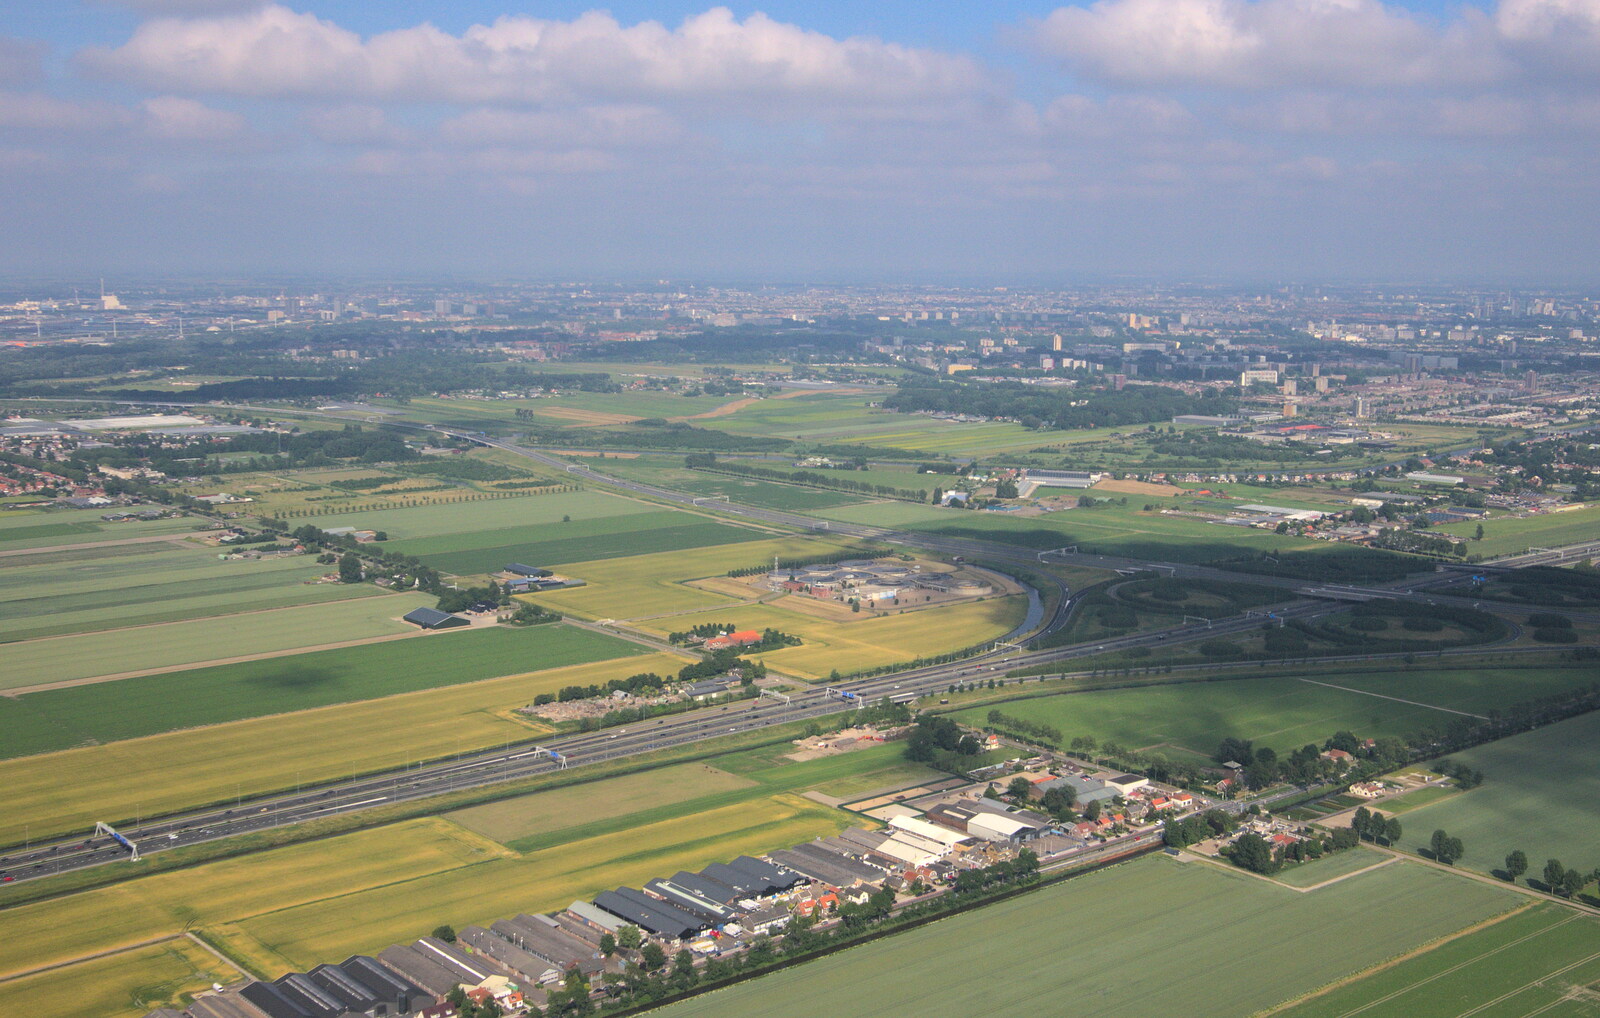 The fields of the Netherlands from A Postcard from Utrecht, Nederlands - 10th June 2018